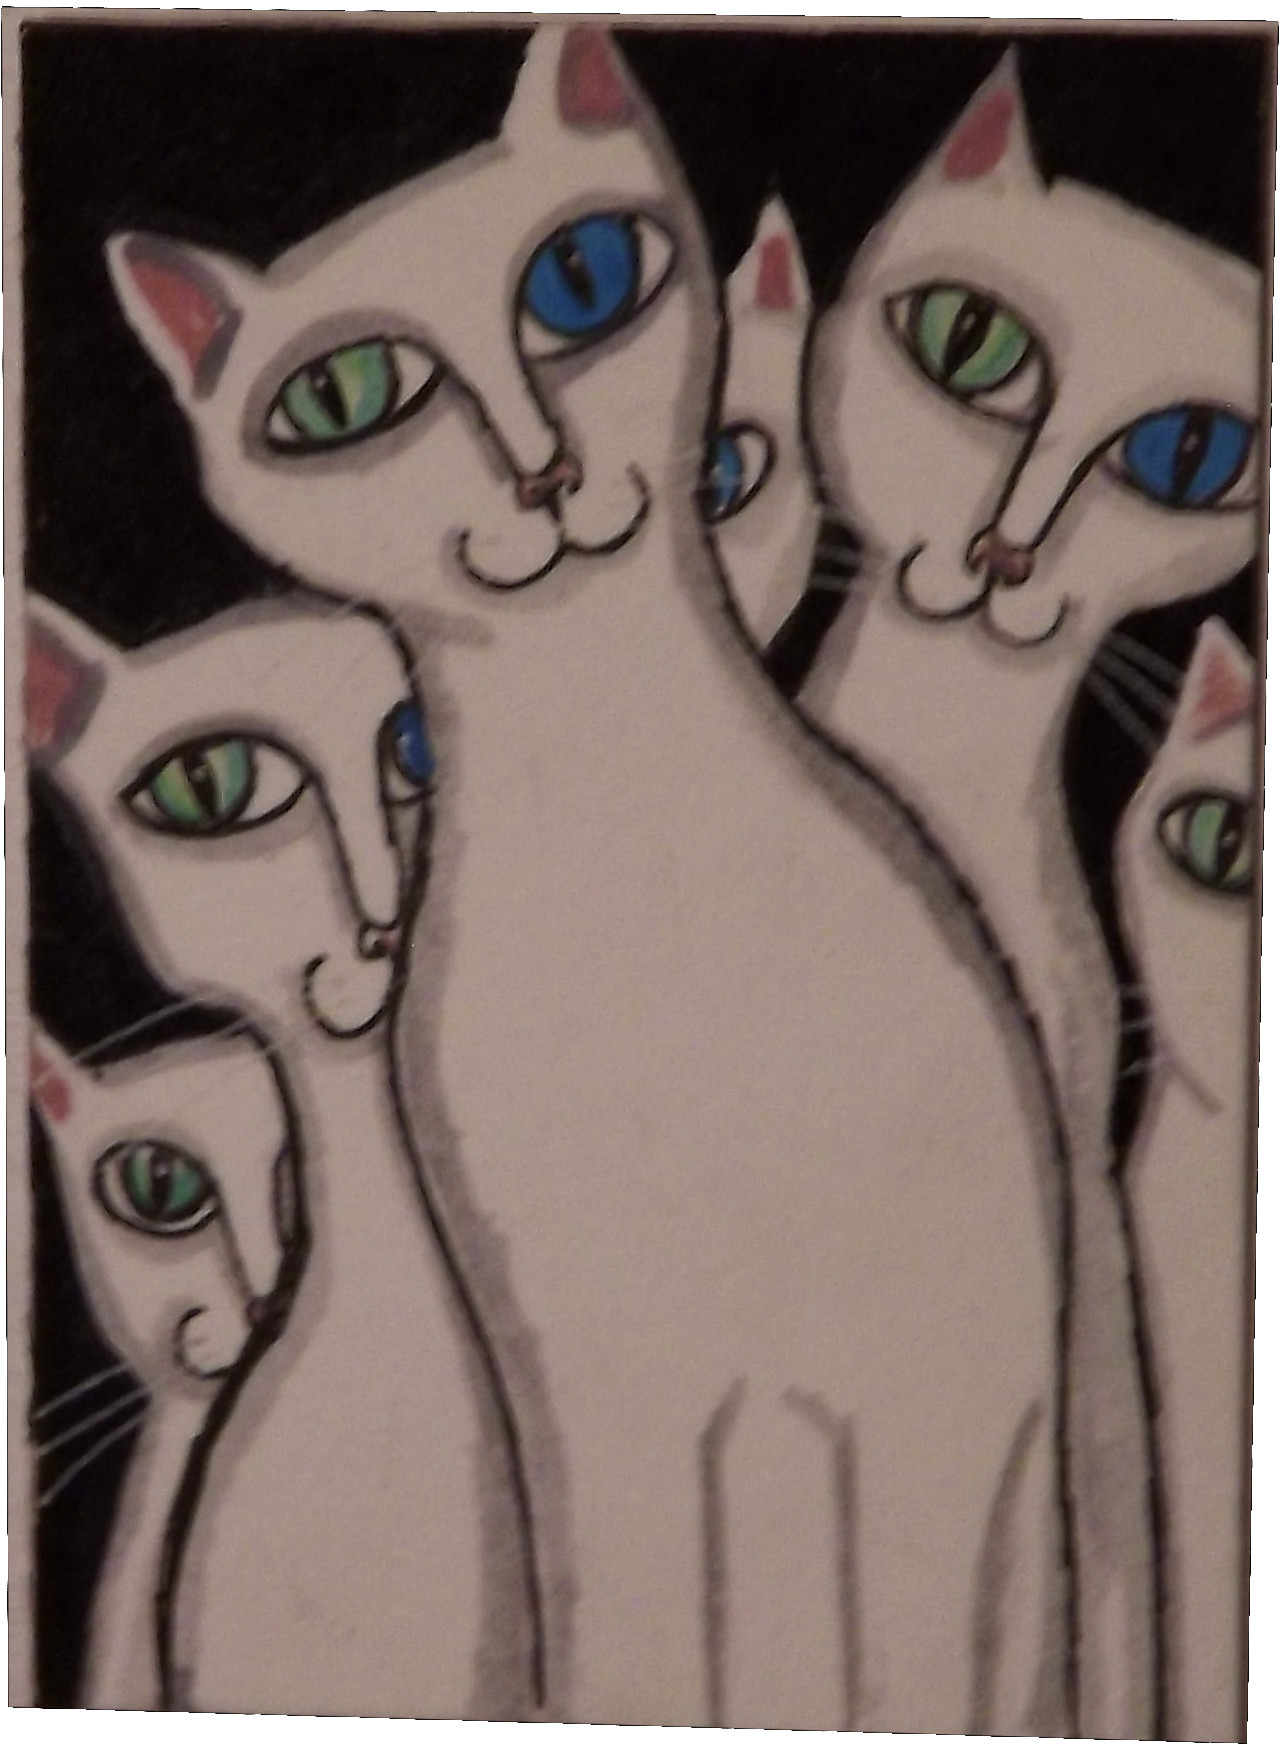 Some White Cats Have a Blue Eye and a Green Eye ACEO original watercolor